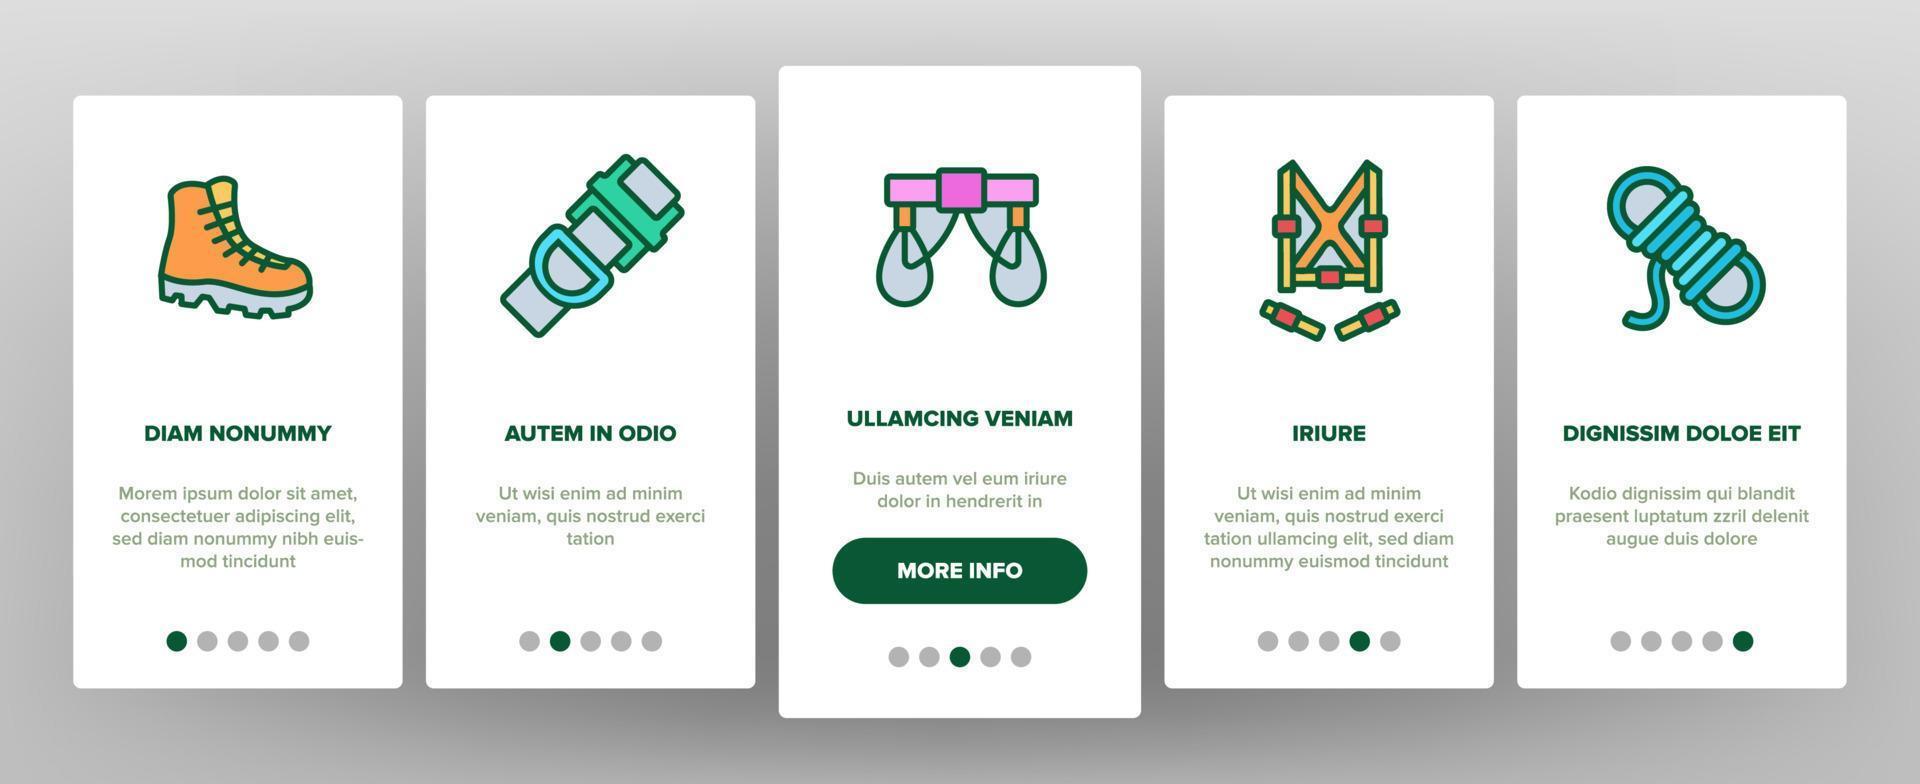 Climber Equipment Onboarding Icons Set Vector